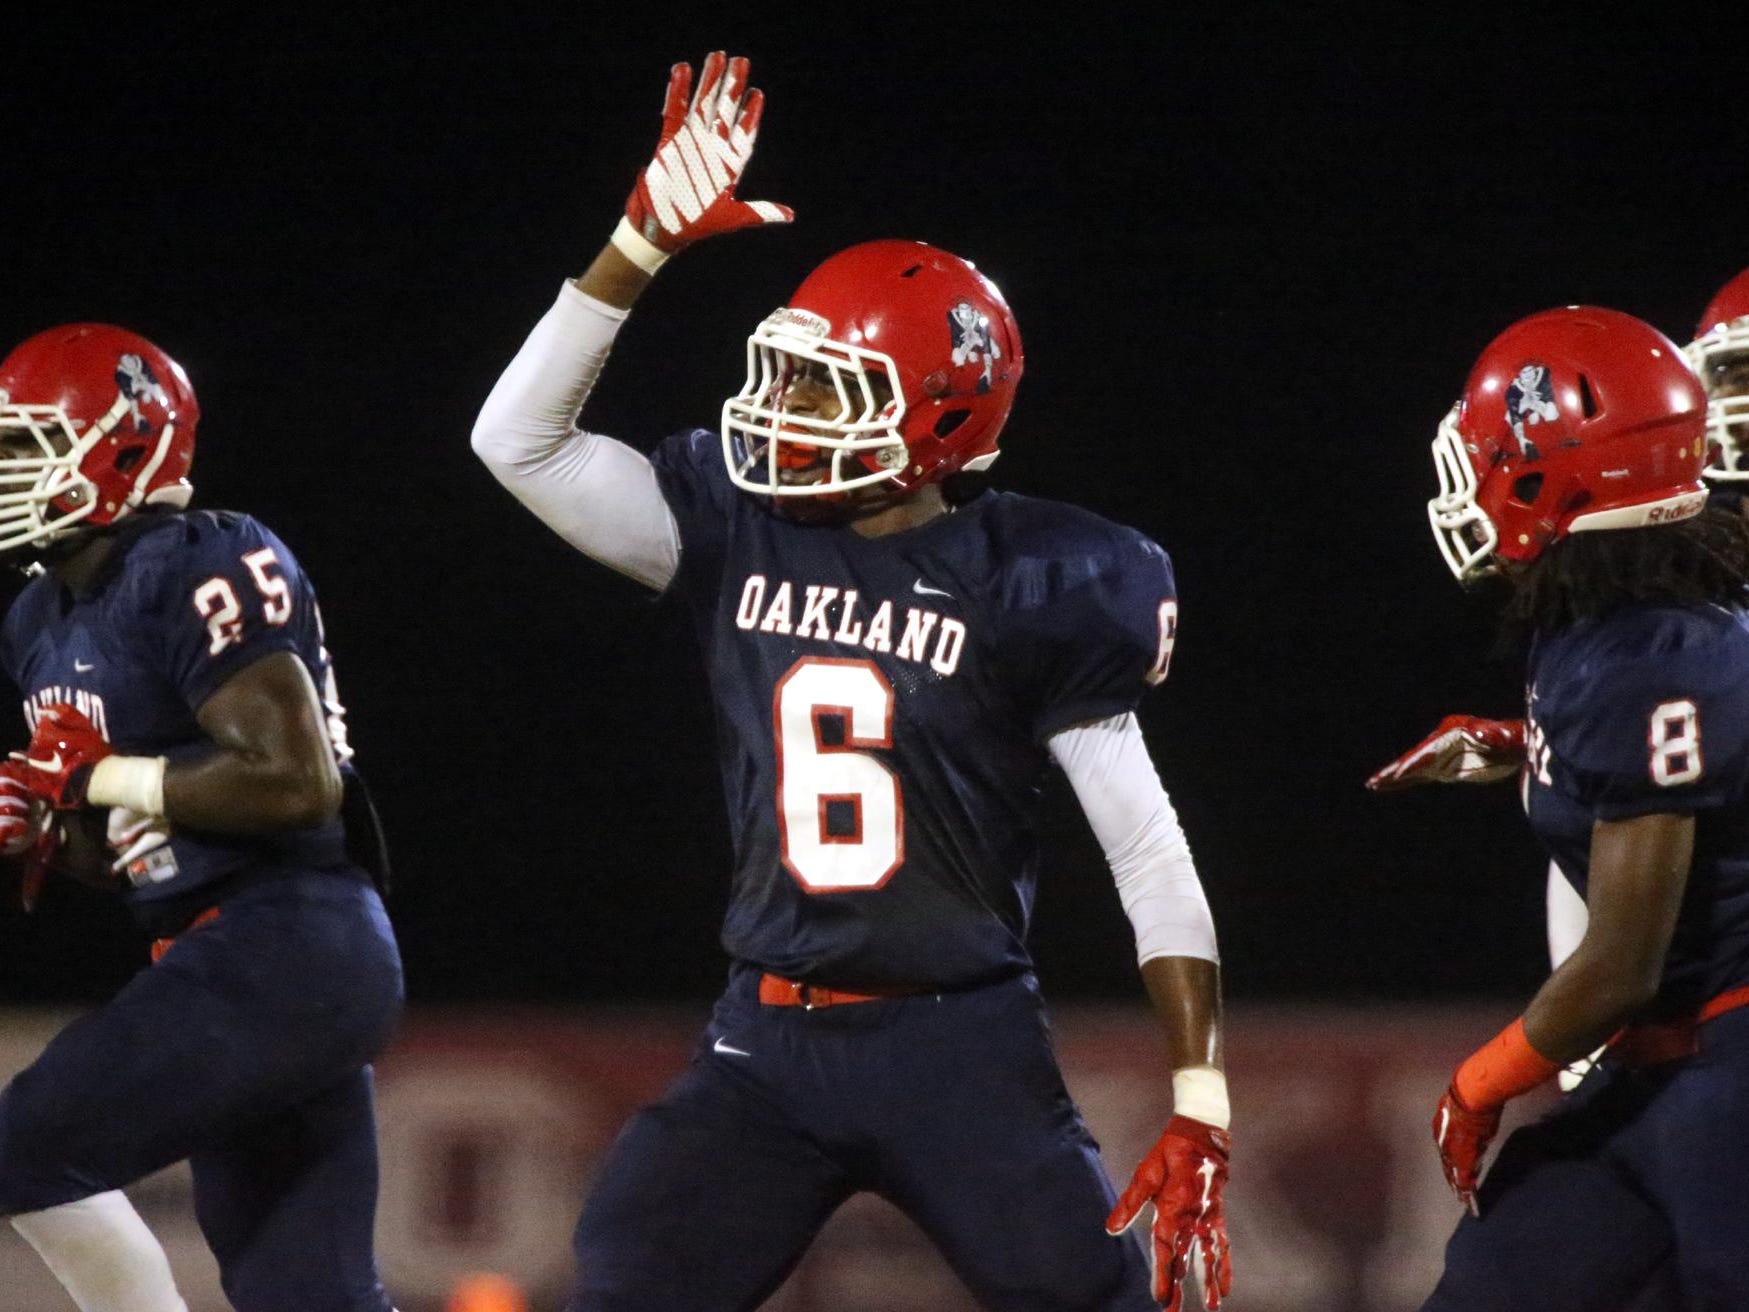 Oakland's Kaleb Oliver (6) celebrates making an interception during the game against Blackman at Oakland, on Friday Sept. 18, 2015.